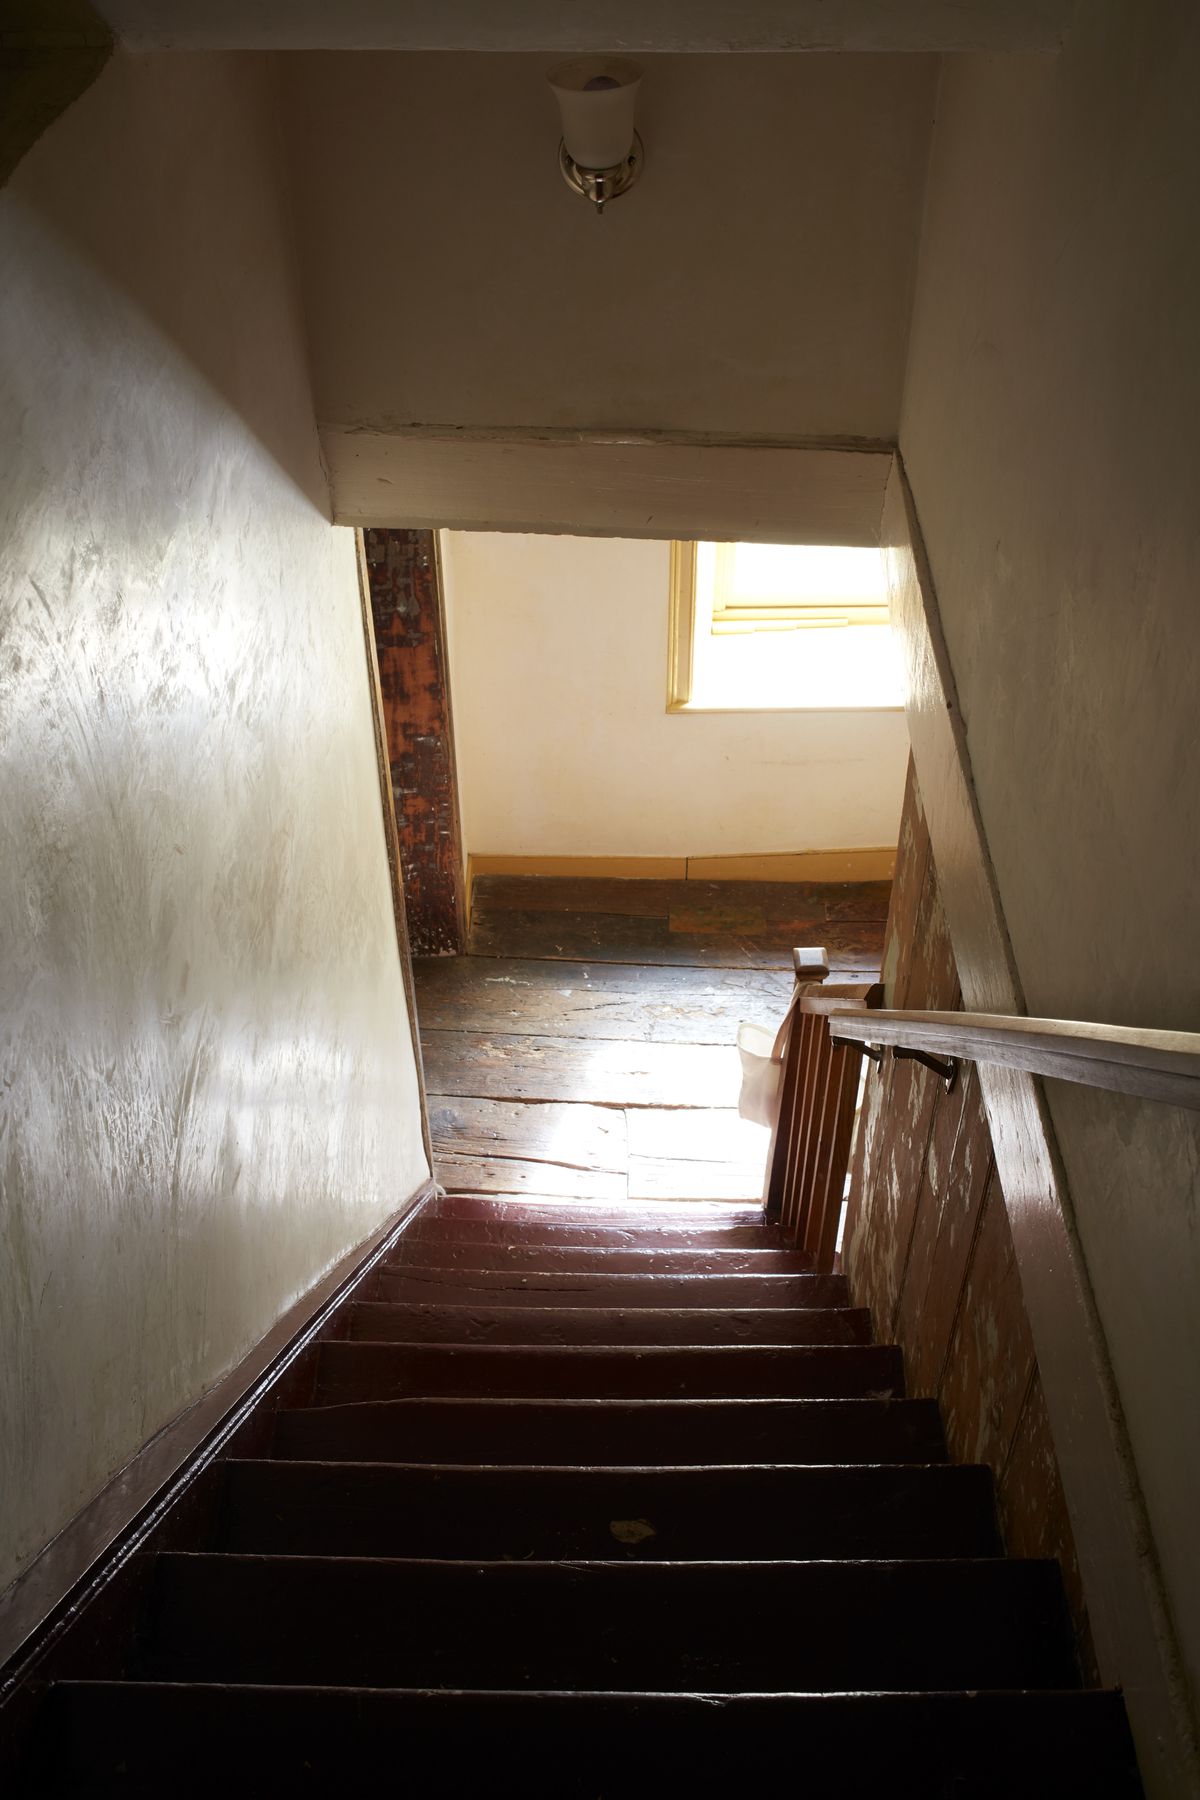 A shot that looks down a wooden stairway surrounded by white plaster walls.